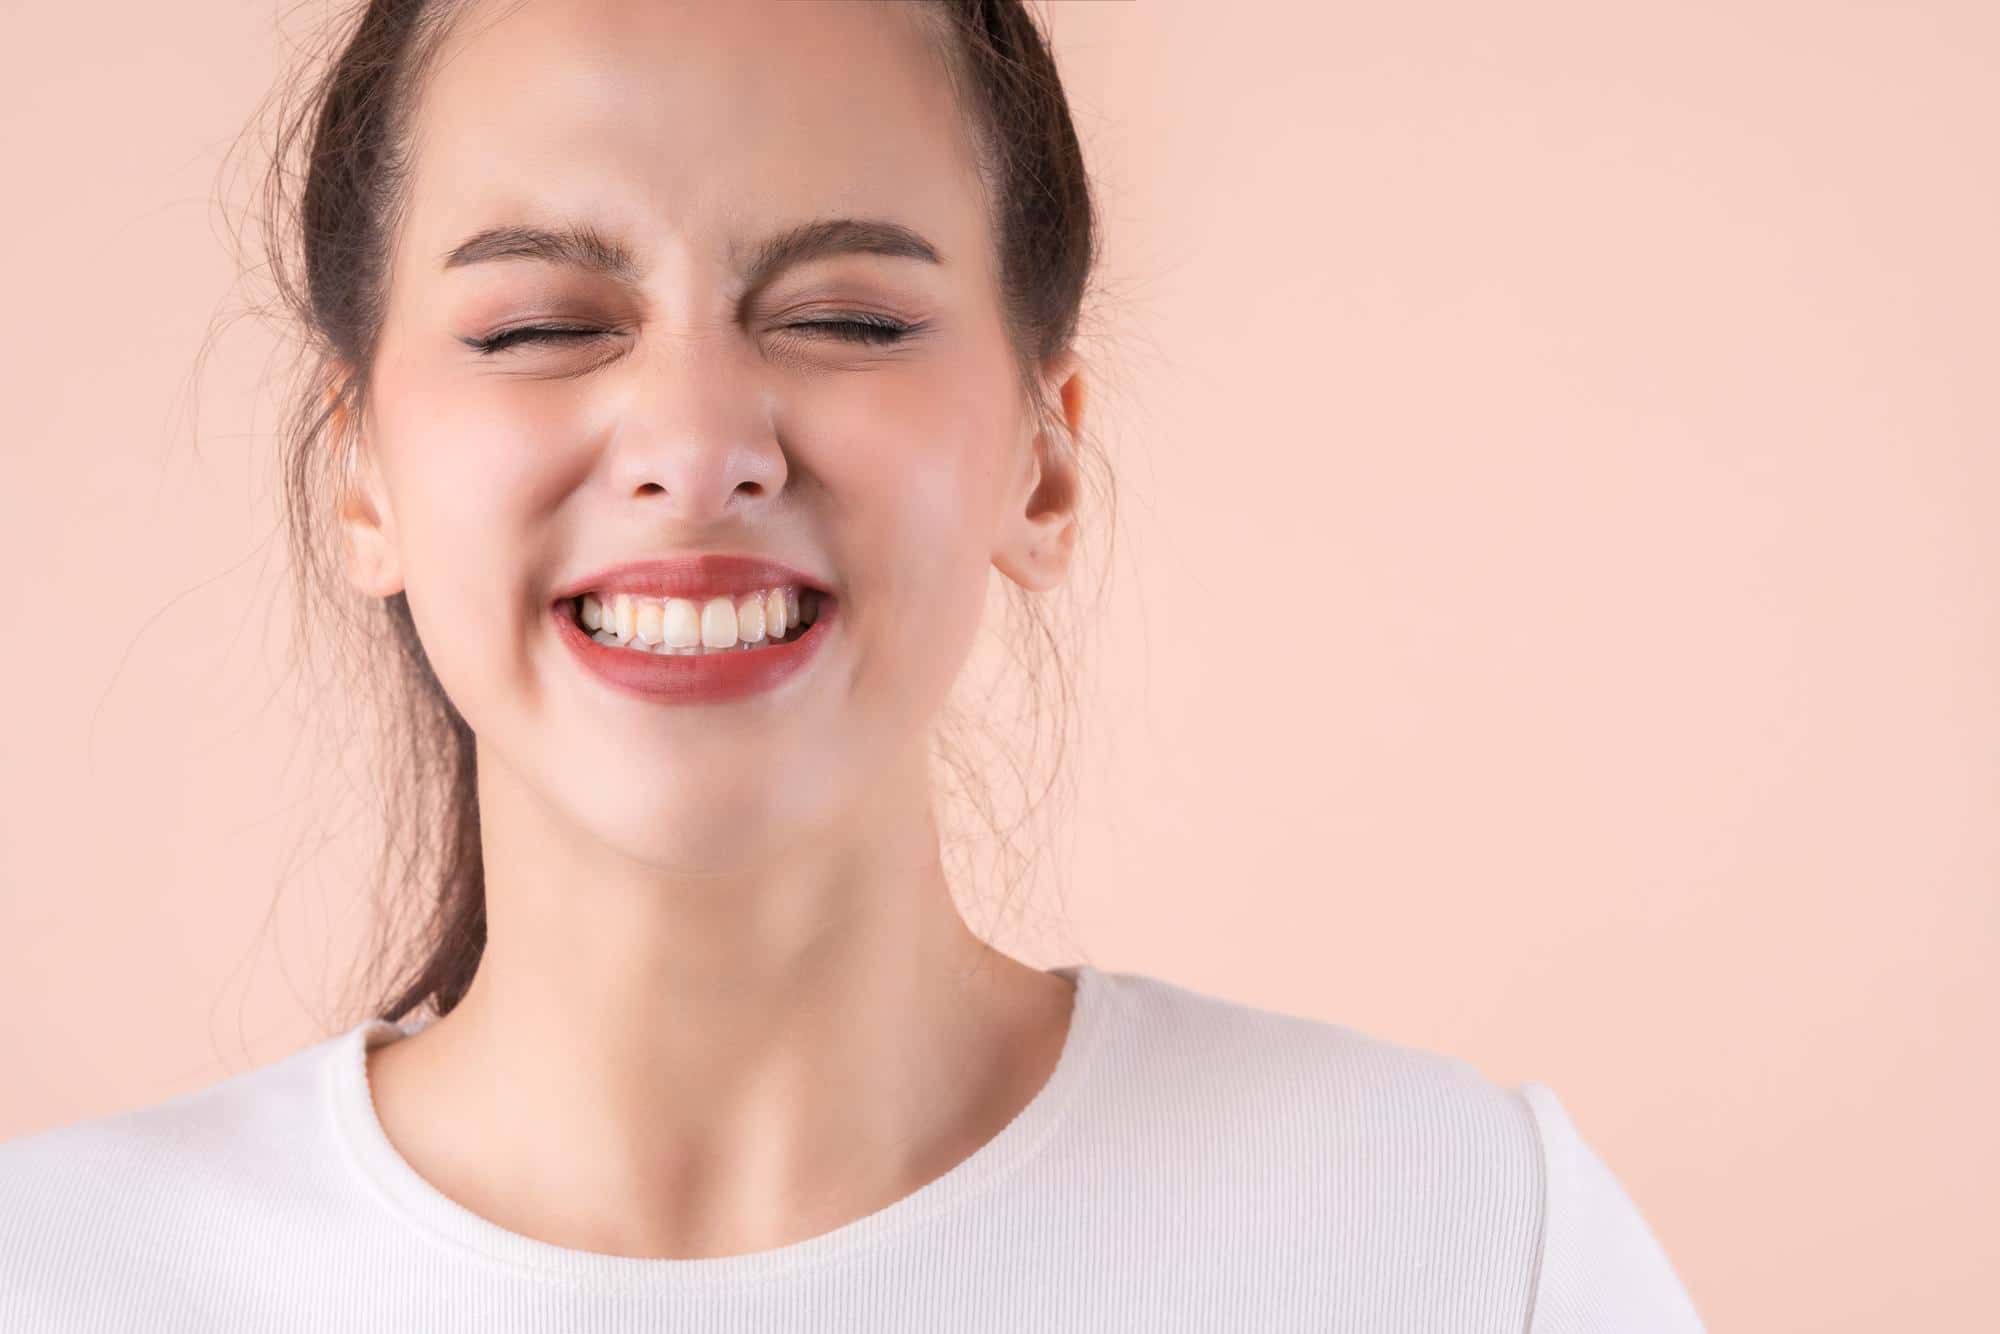 Bruxism : Symptoms, Causes, and Management